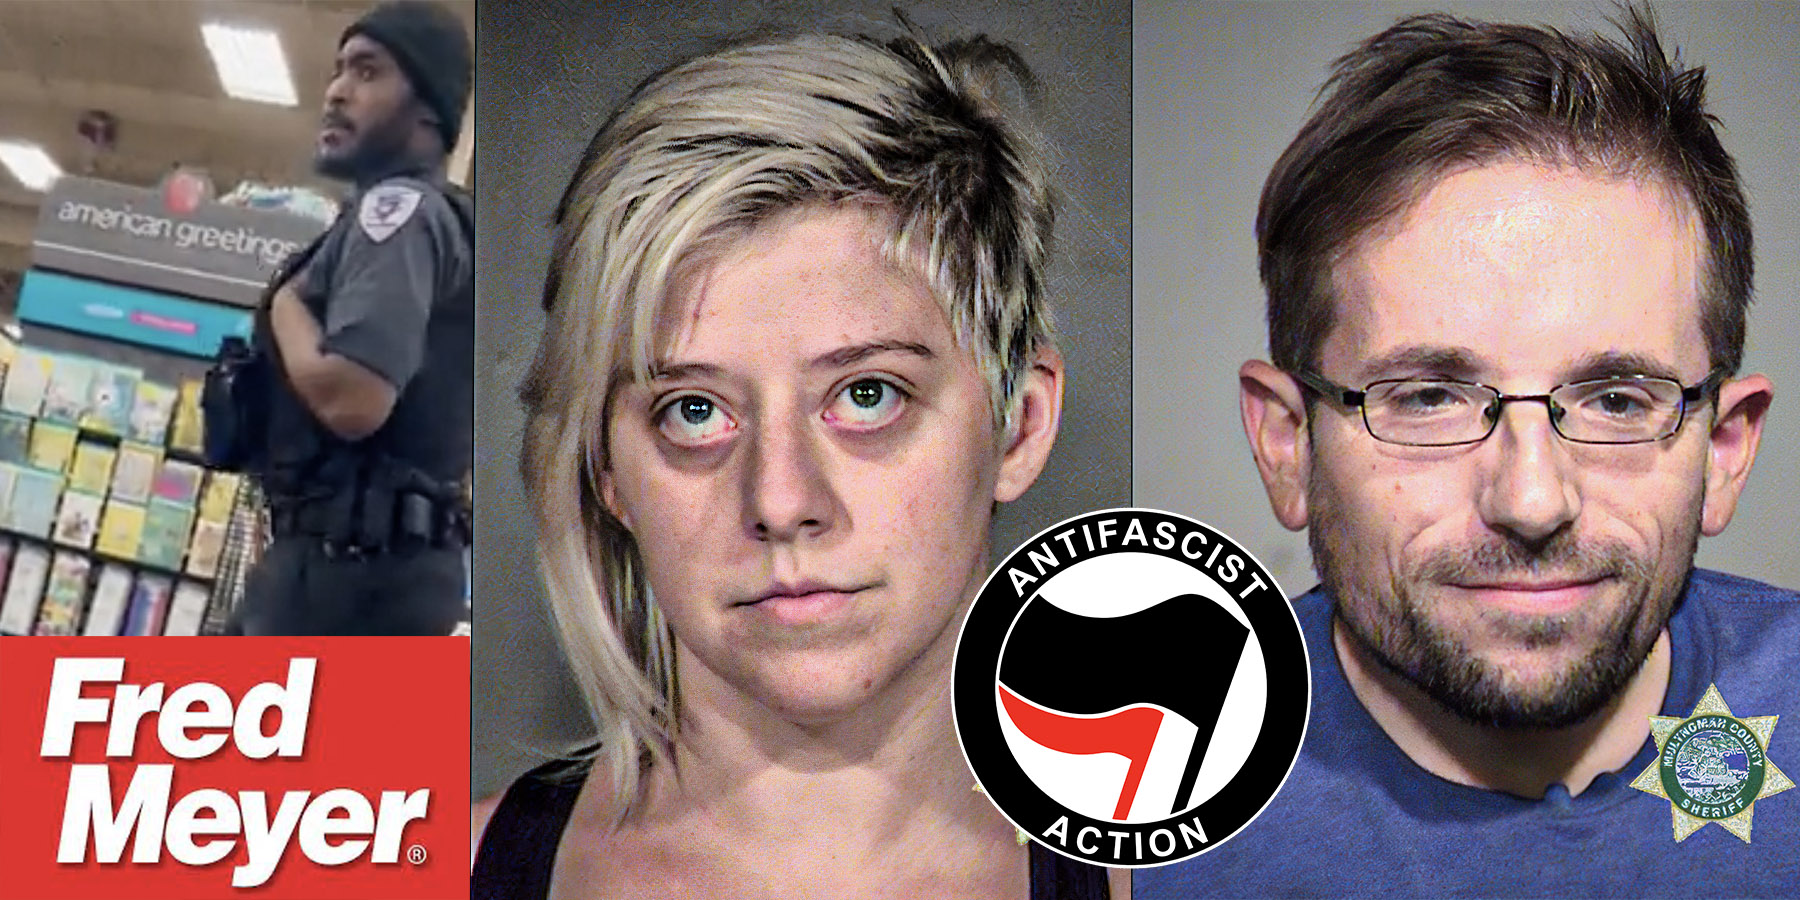 EXCLUSIVE: White Portland Antifa members get black security fired from grocery store, claiming he’s a white supremacist